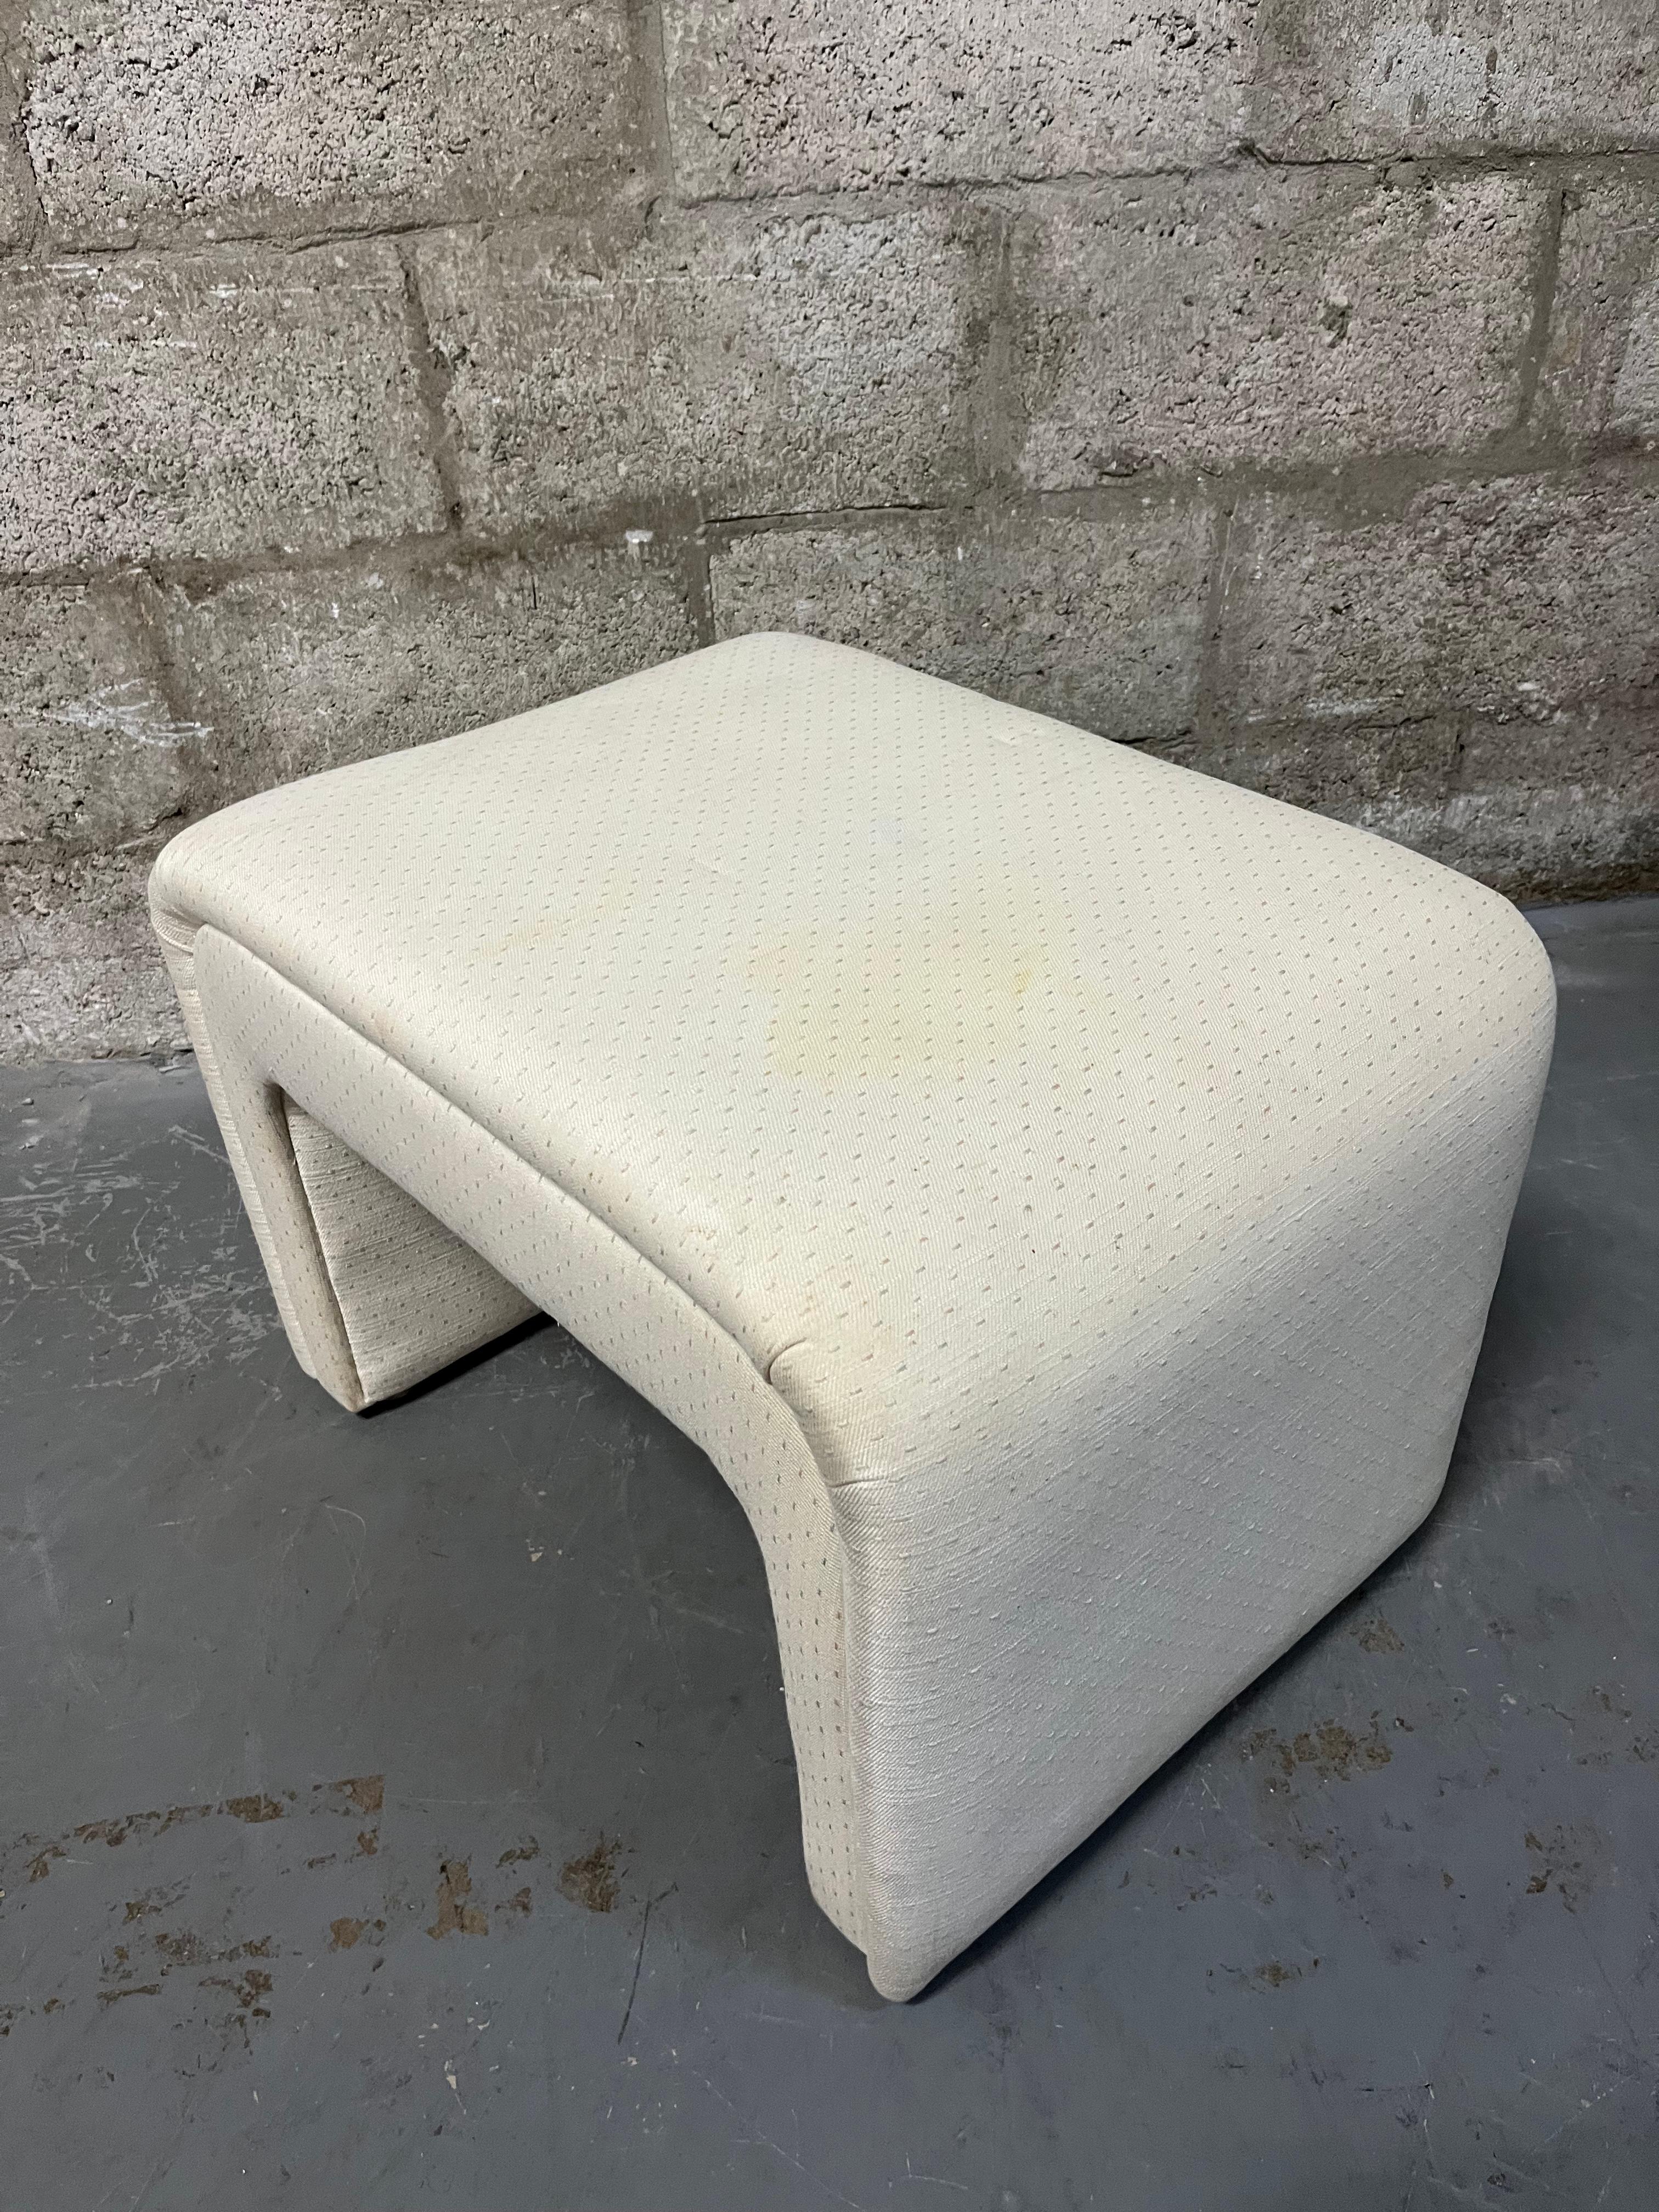 Art Deco Revival Upholstered Waterfall Bench by Thayer Coggin. Circa 1980s  For Sale 2